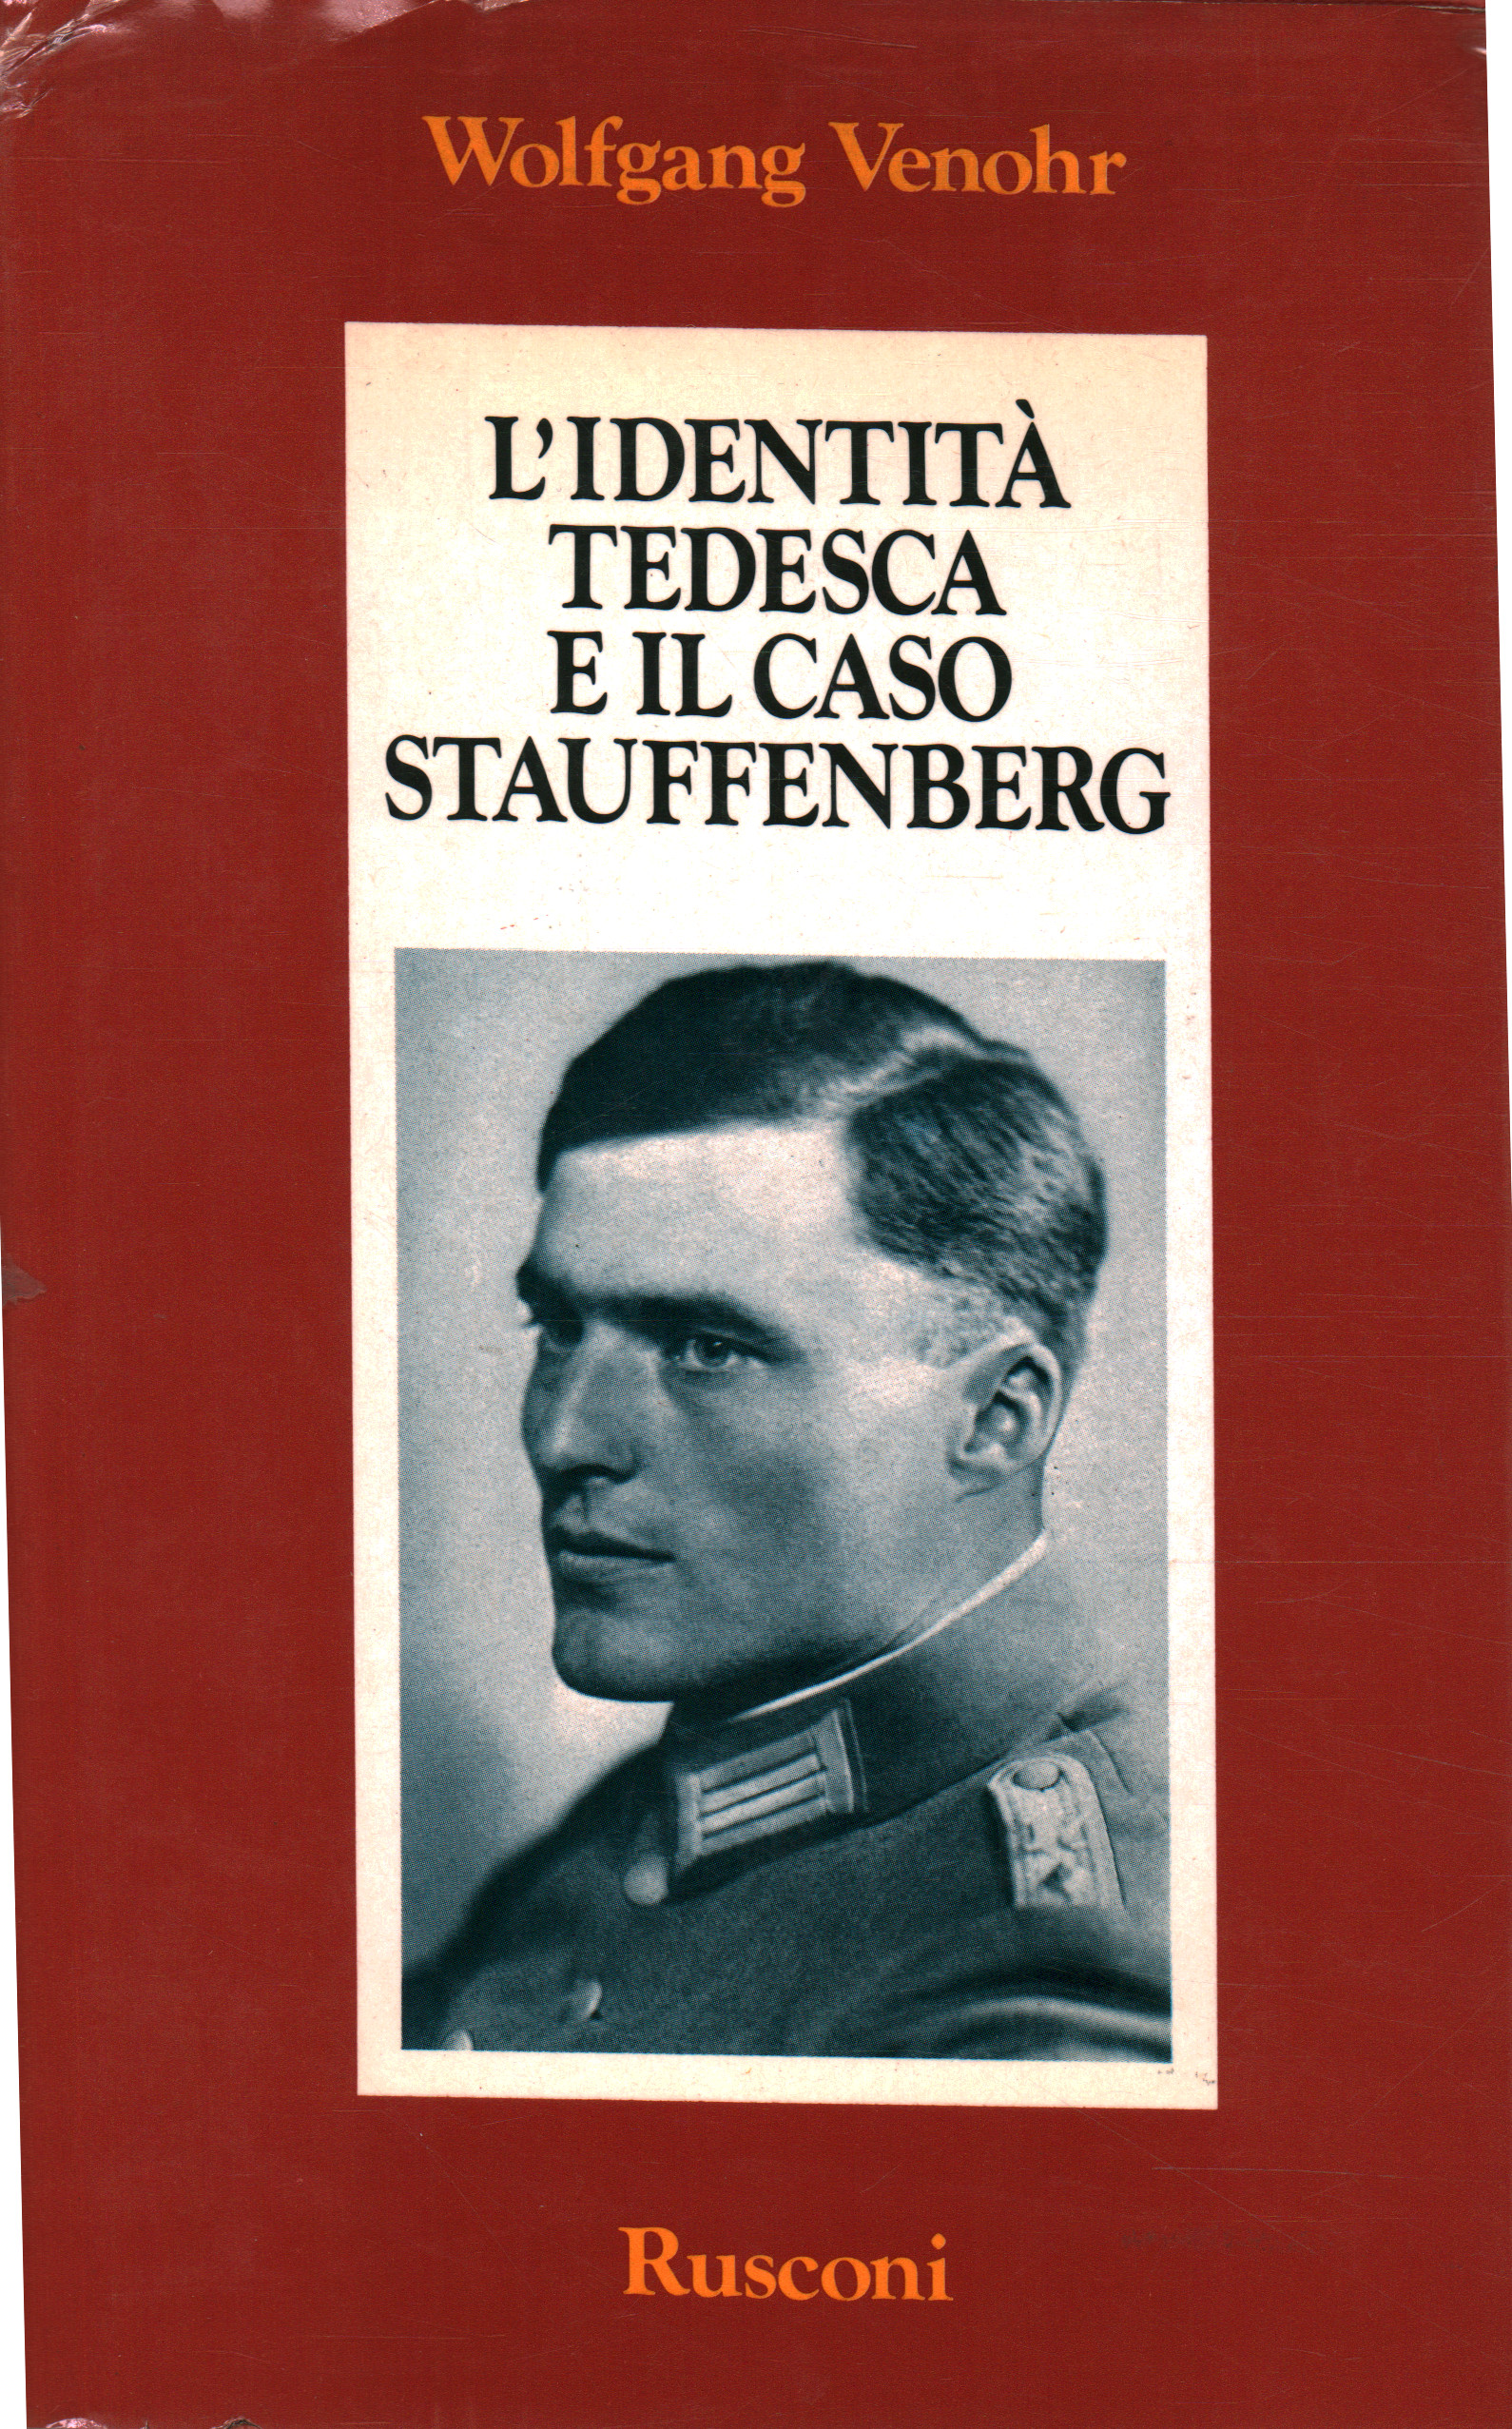 German identity and the Stauffenberg case, Wolfgang Venhor